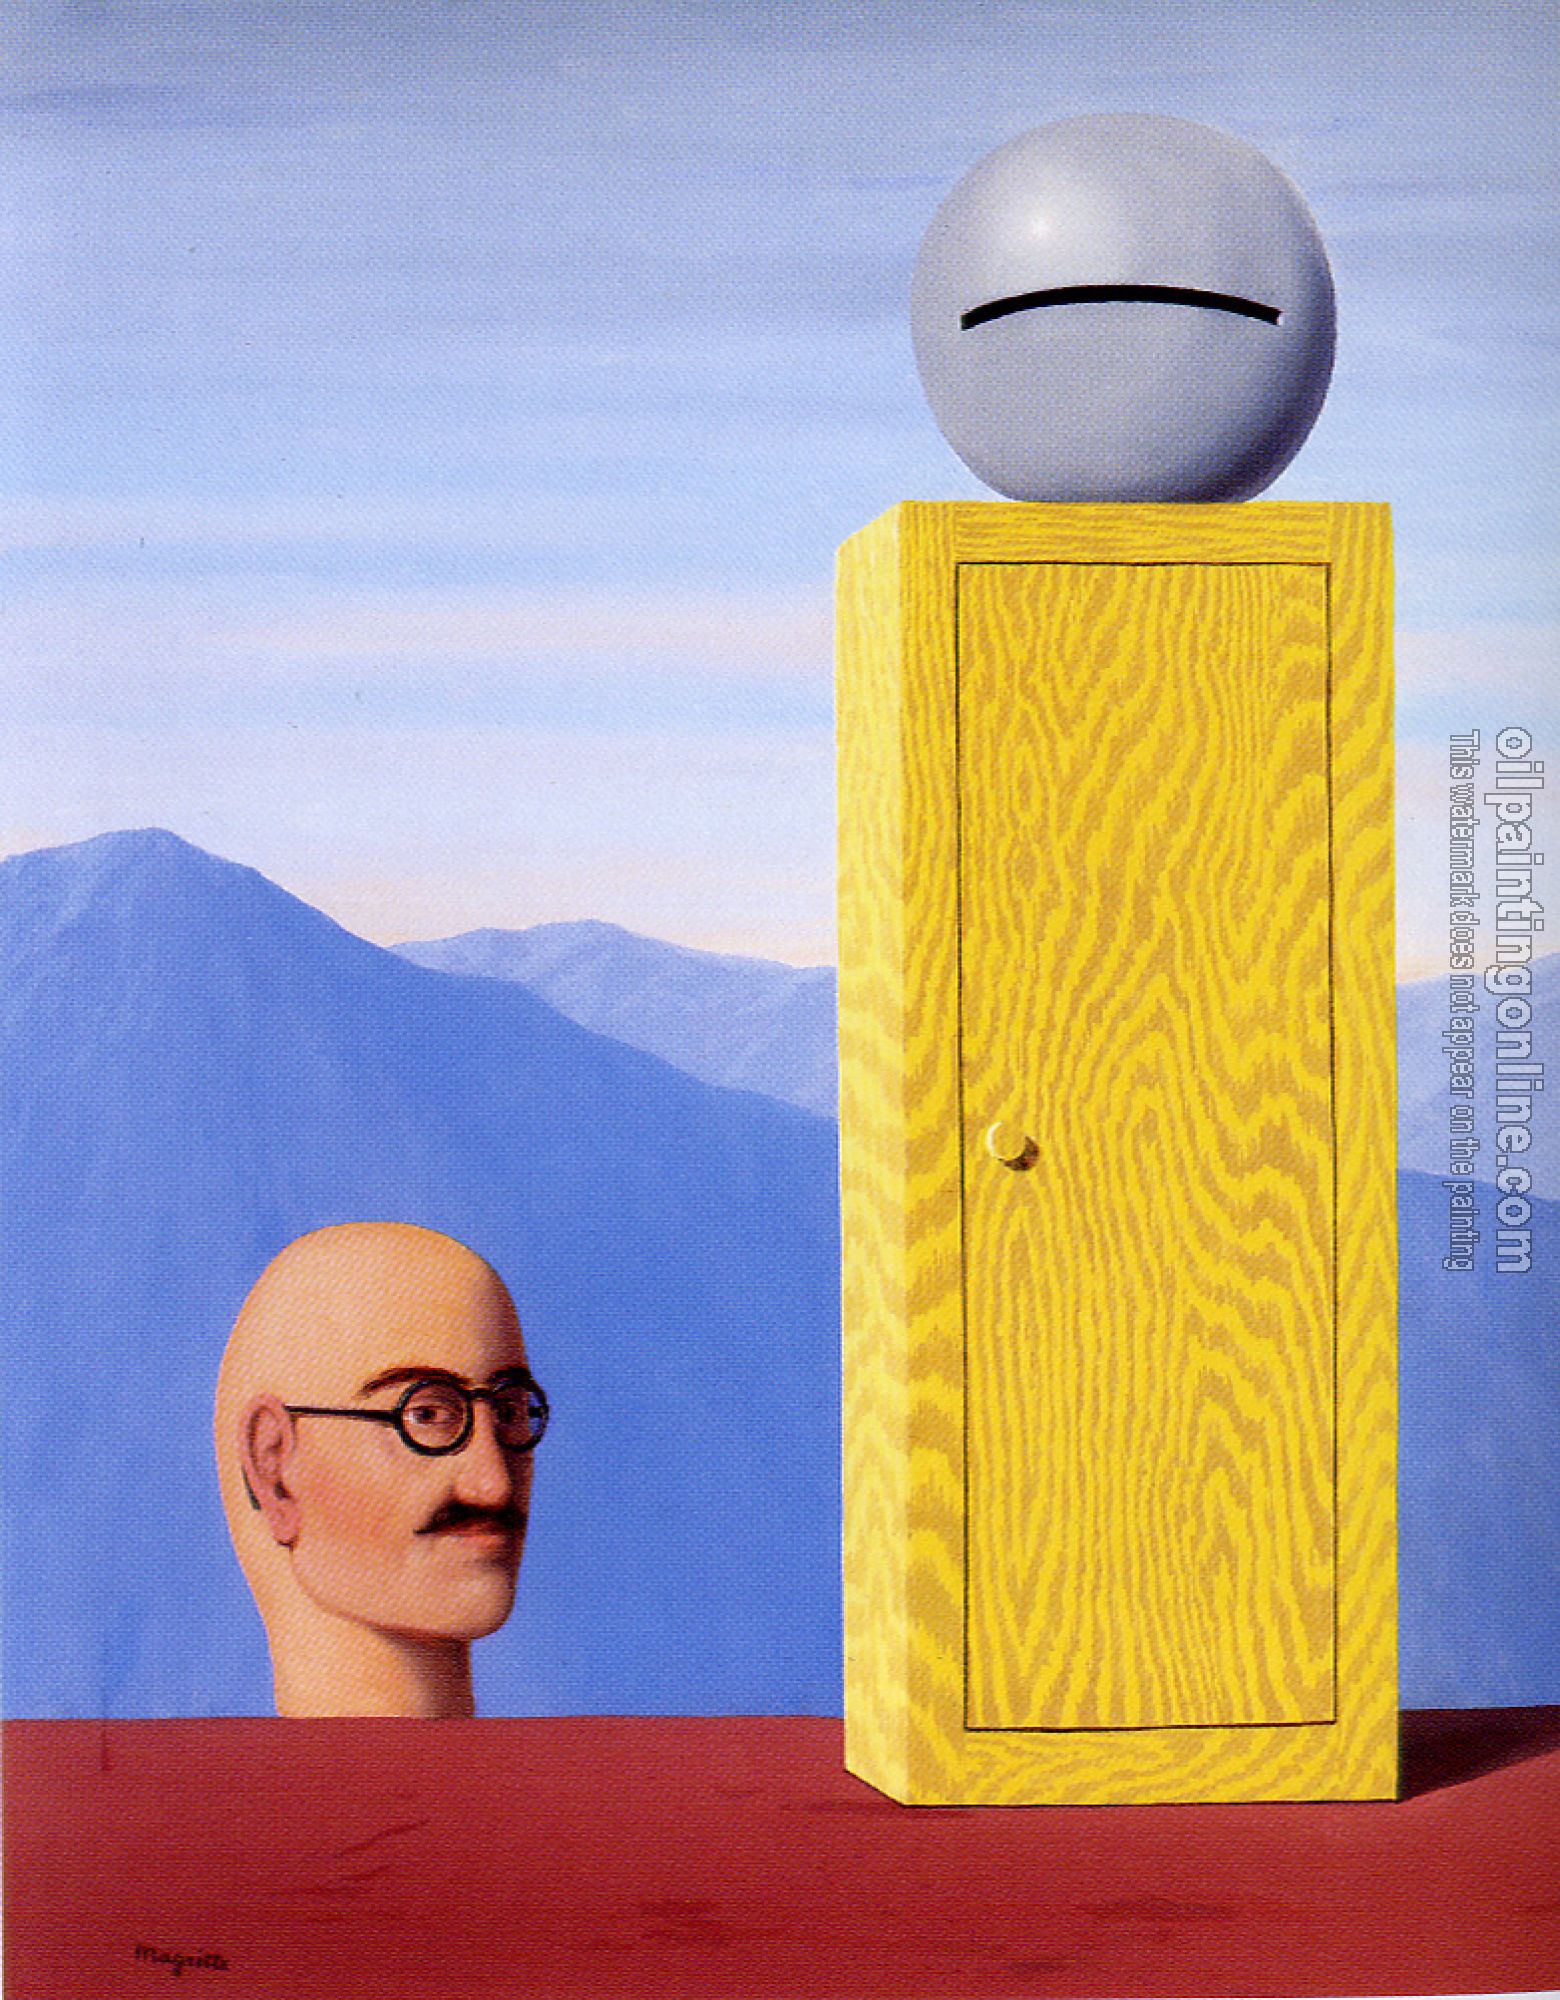 Magritte, Rene - discourse on method